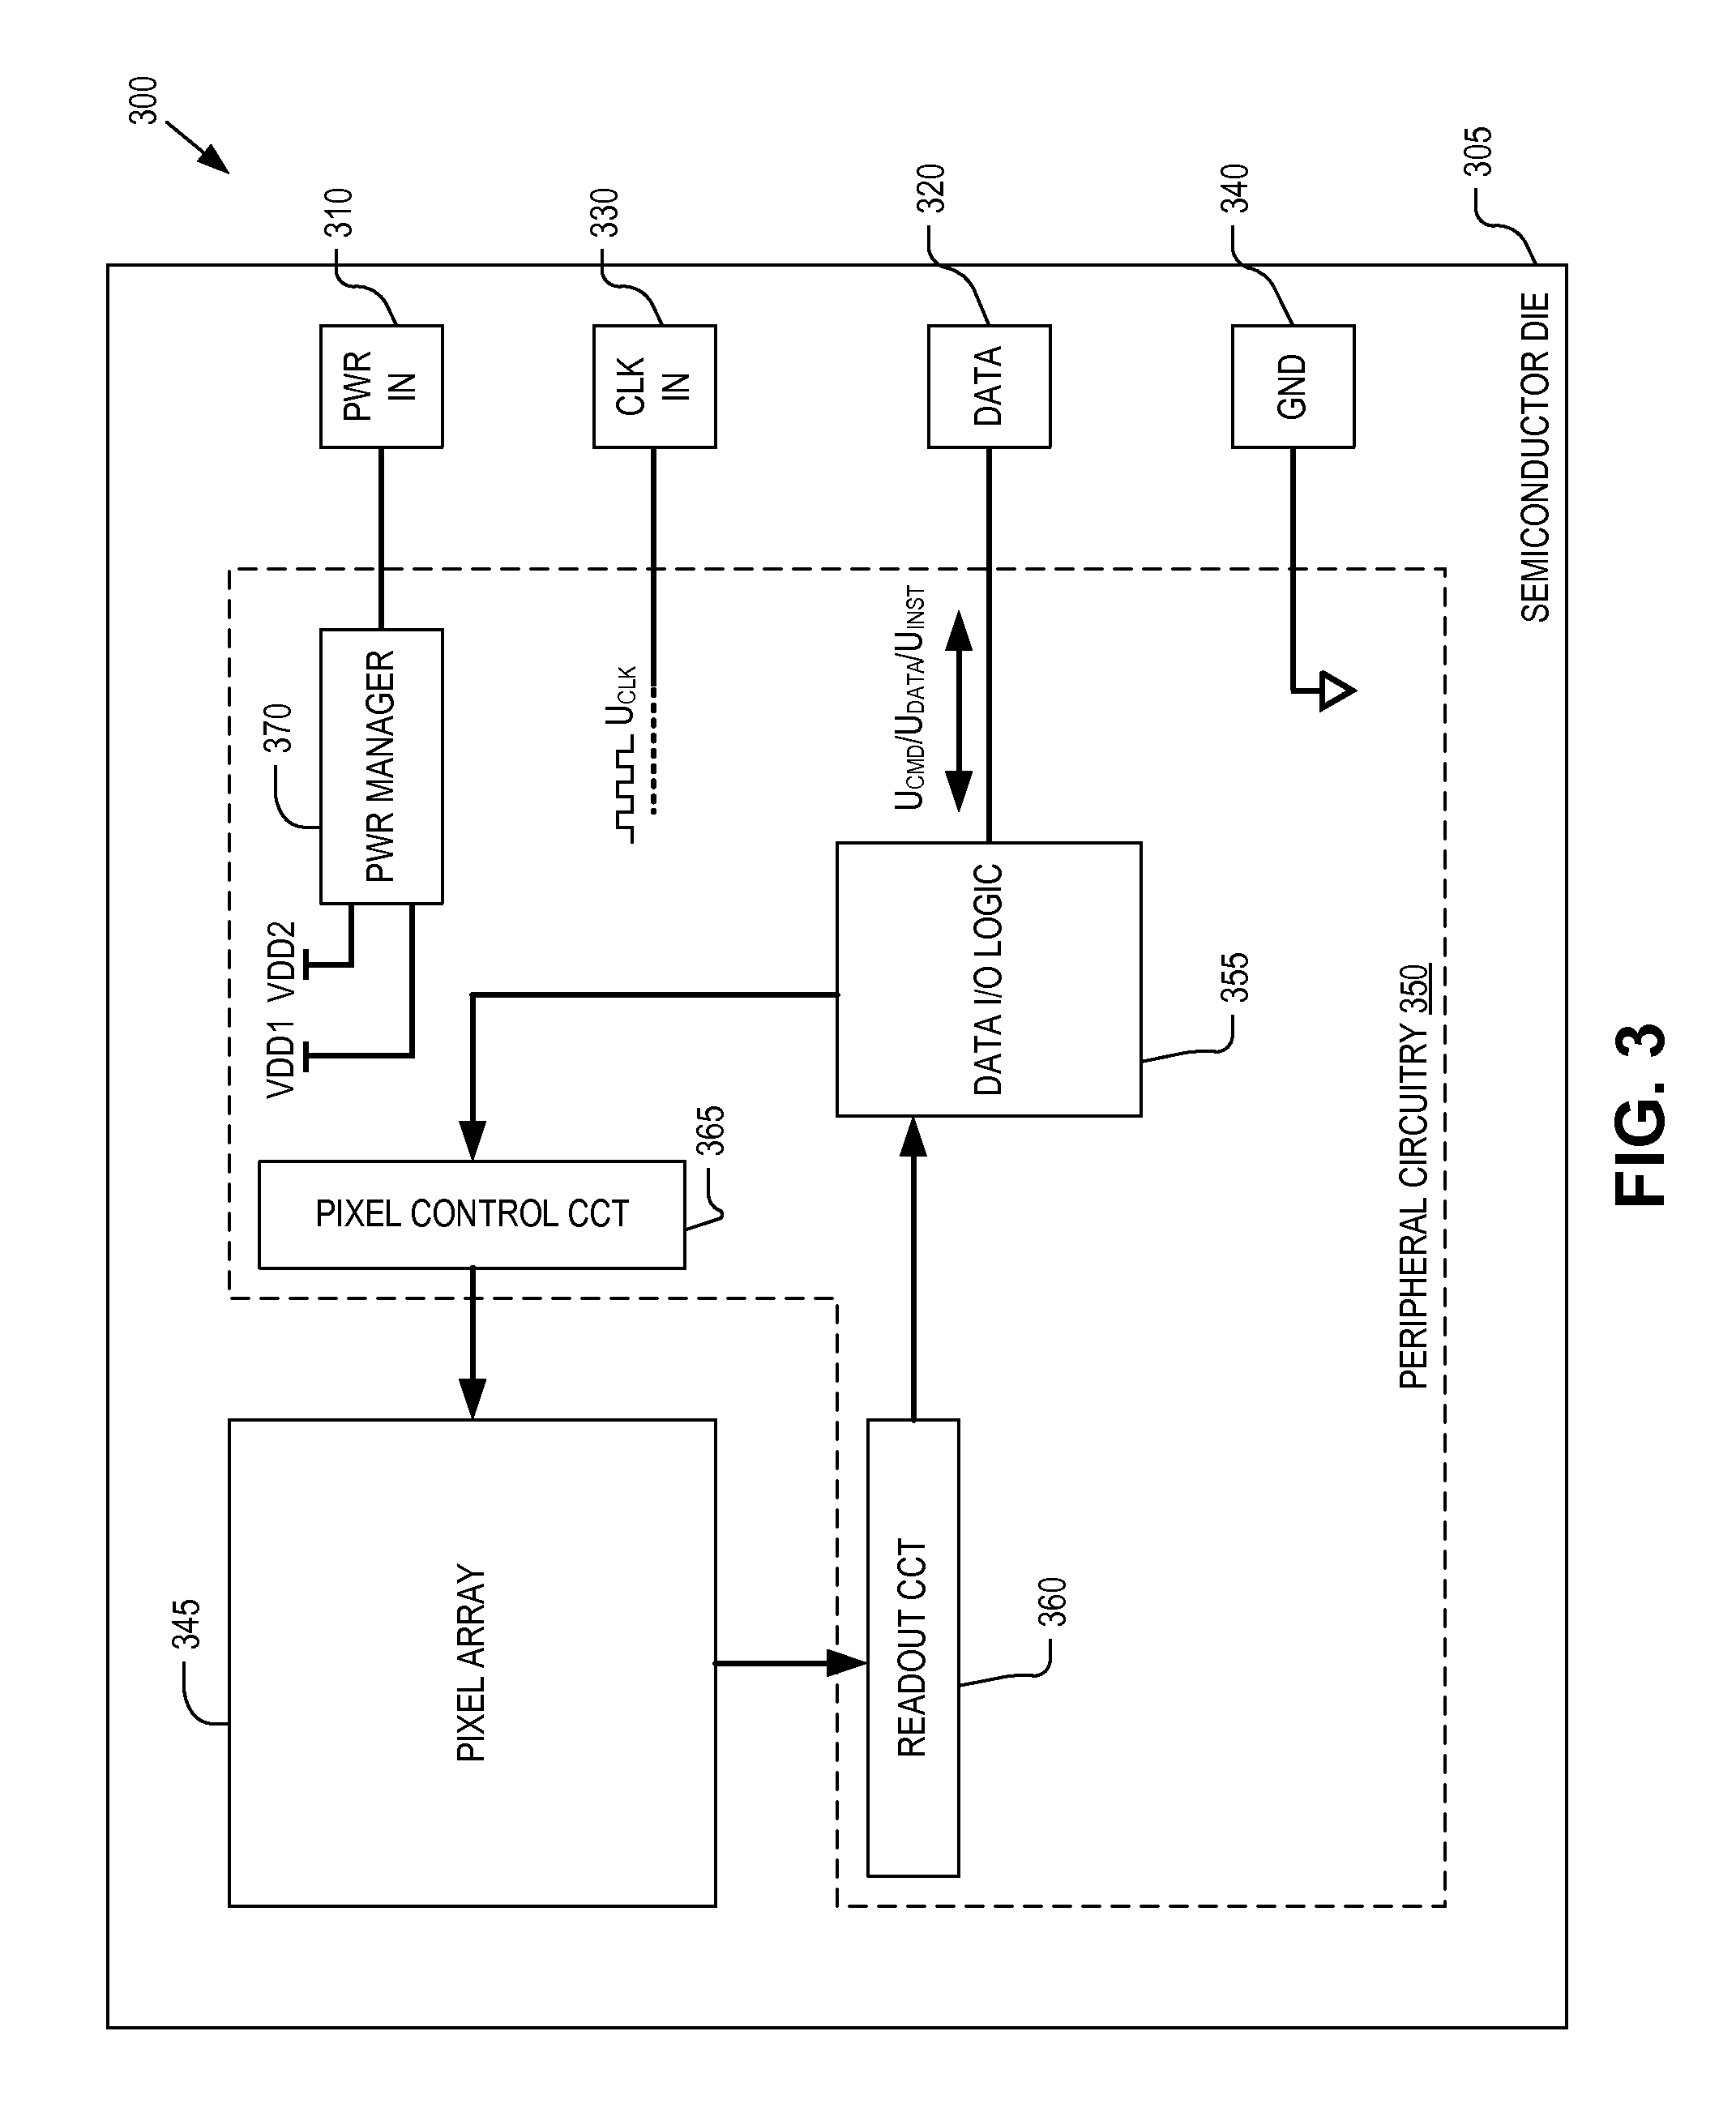 Shared terminal of an image sensor system for transferring image data and control signals